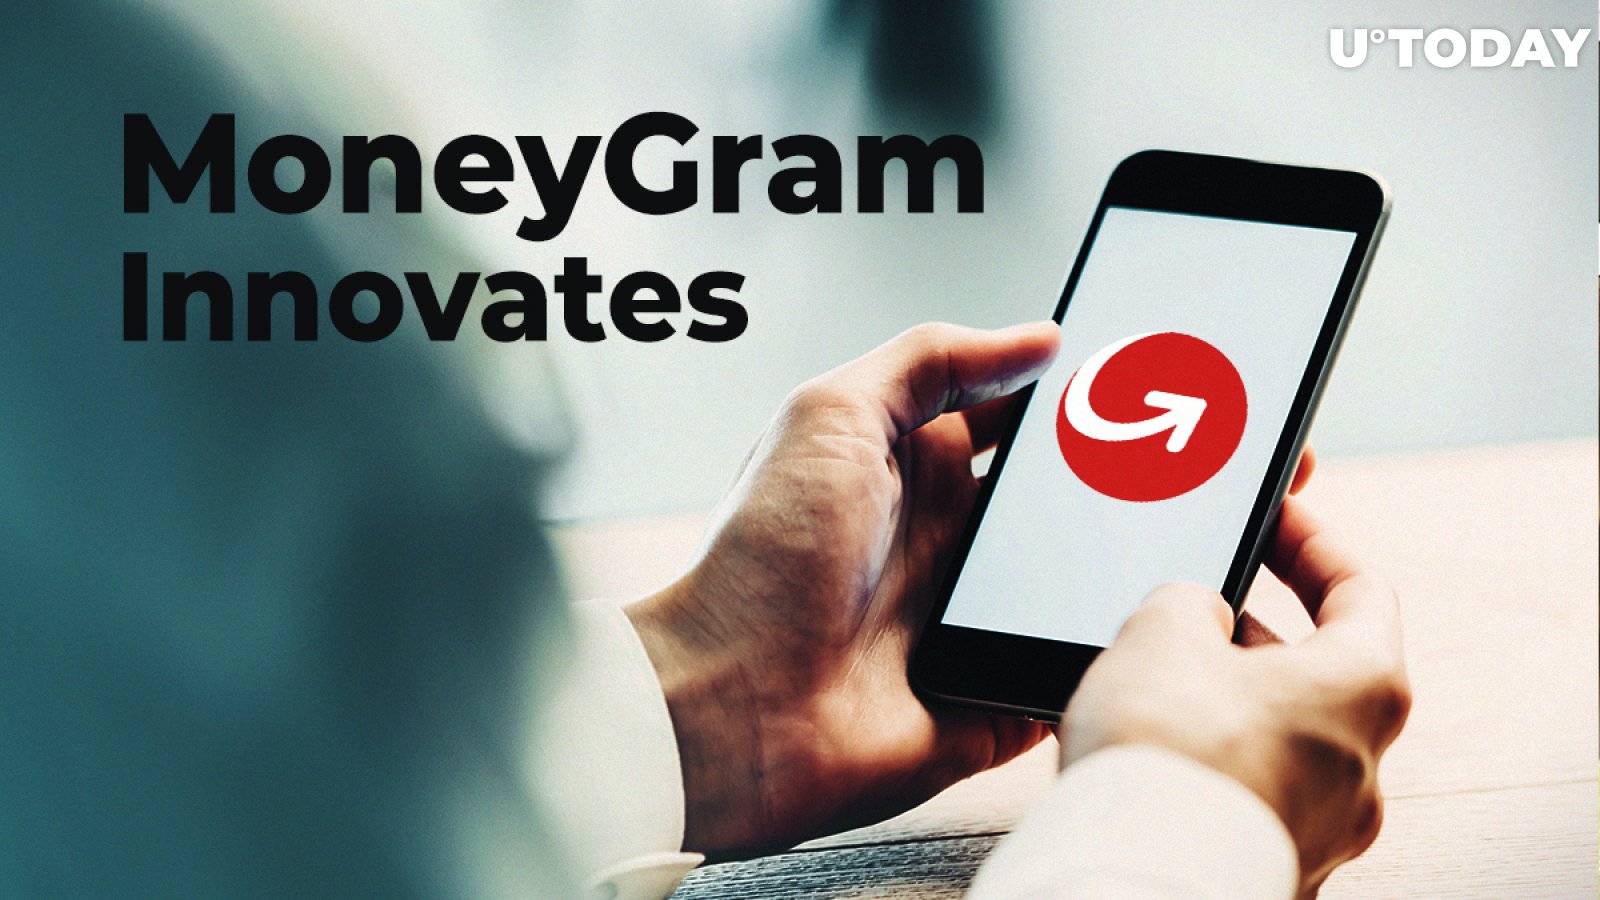 Ripple’s Partner MoneyGram Now Lets Customers Send Money Directly to Phone Numbers 